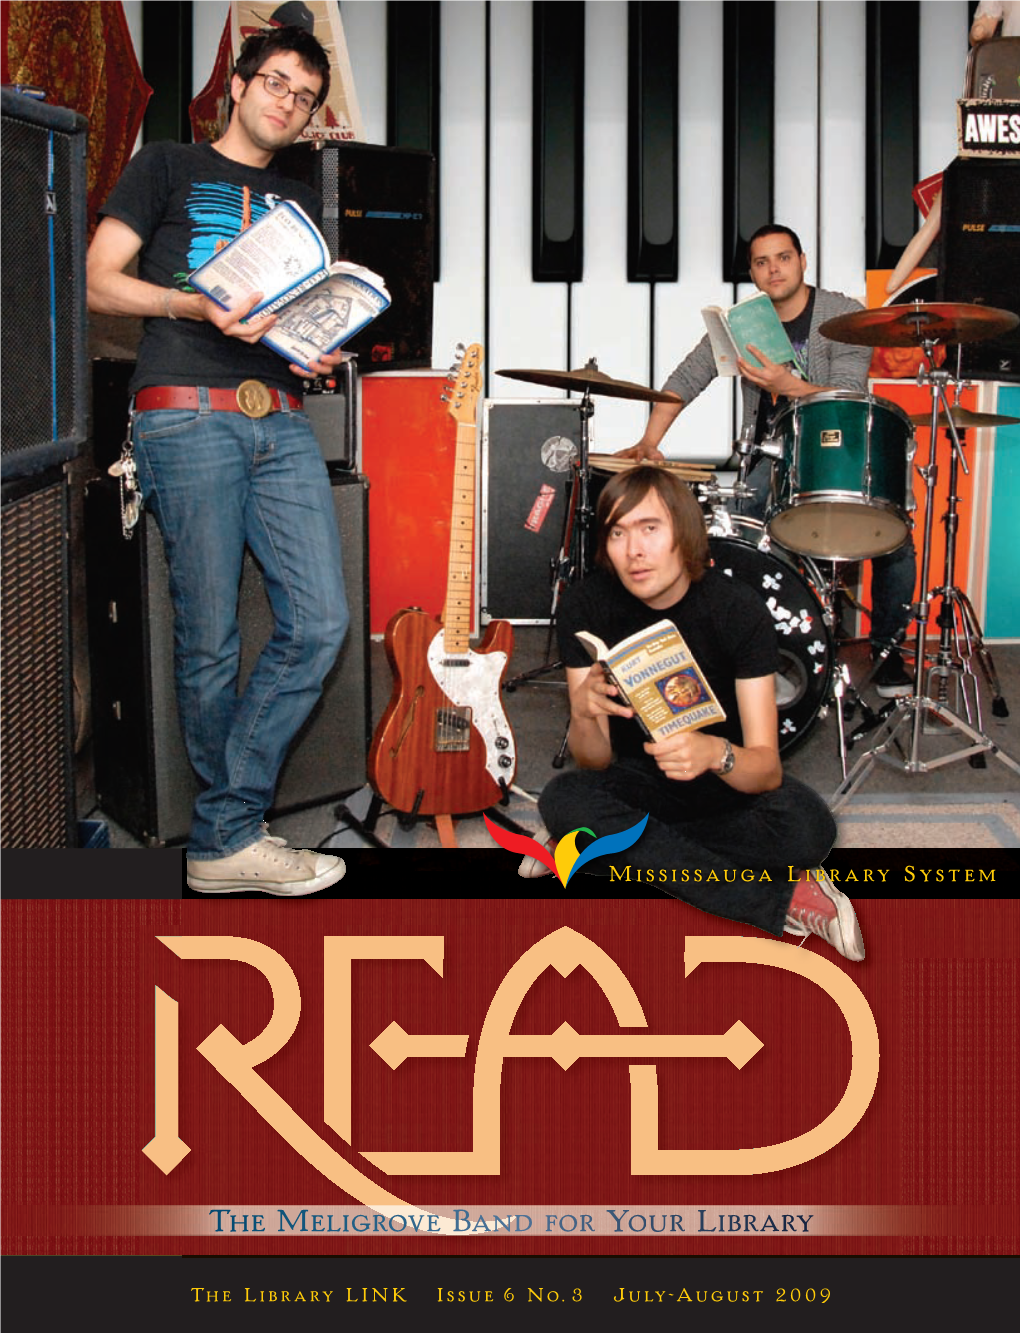 The Meligrove Band Rove Band for Your Librarry